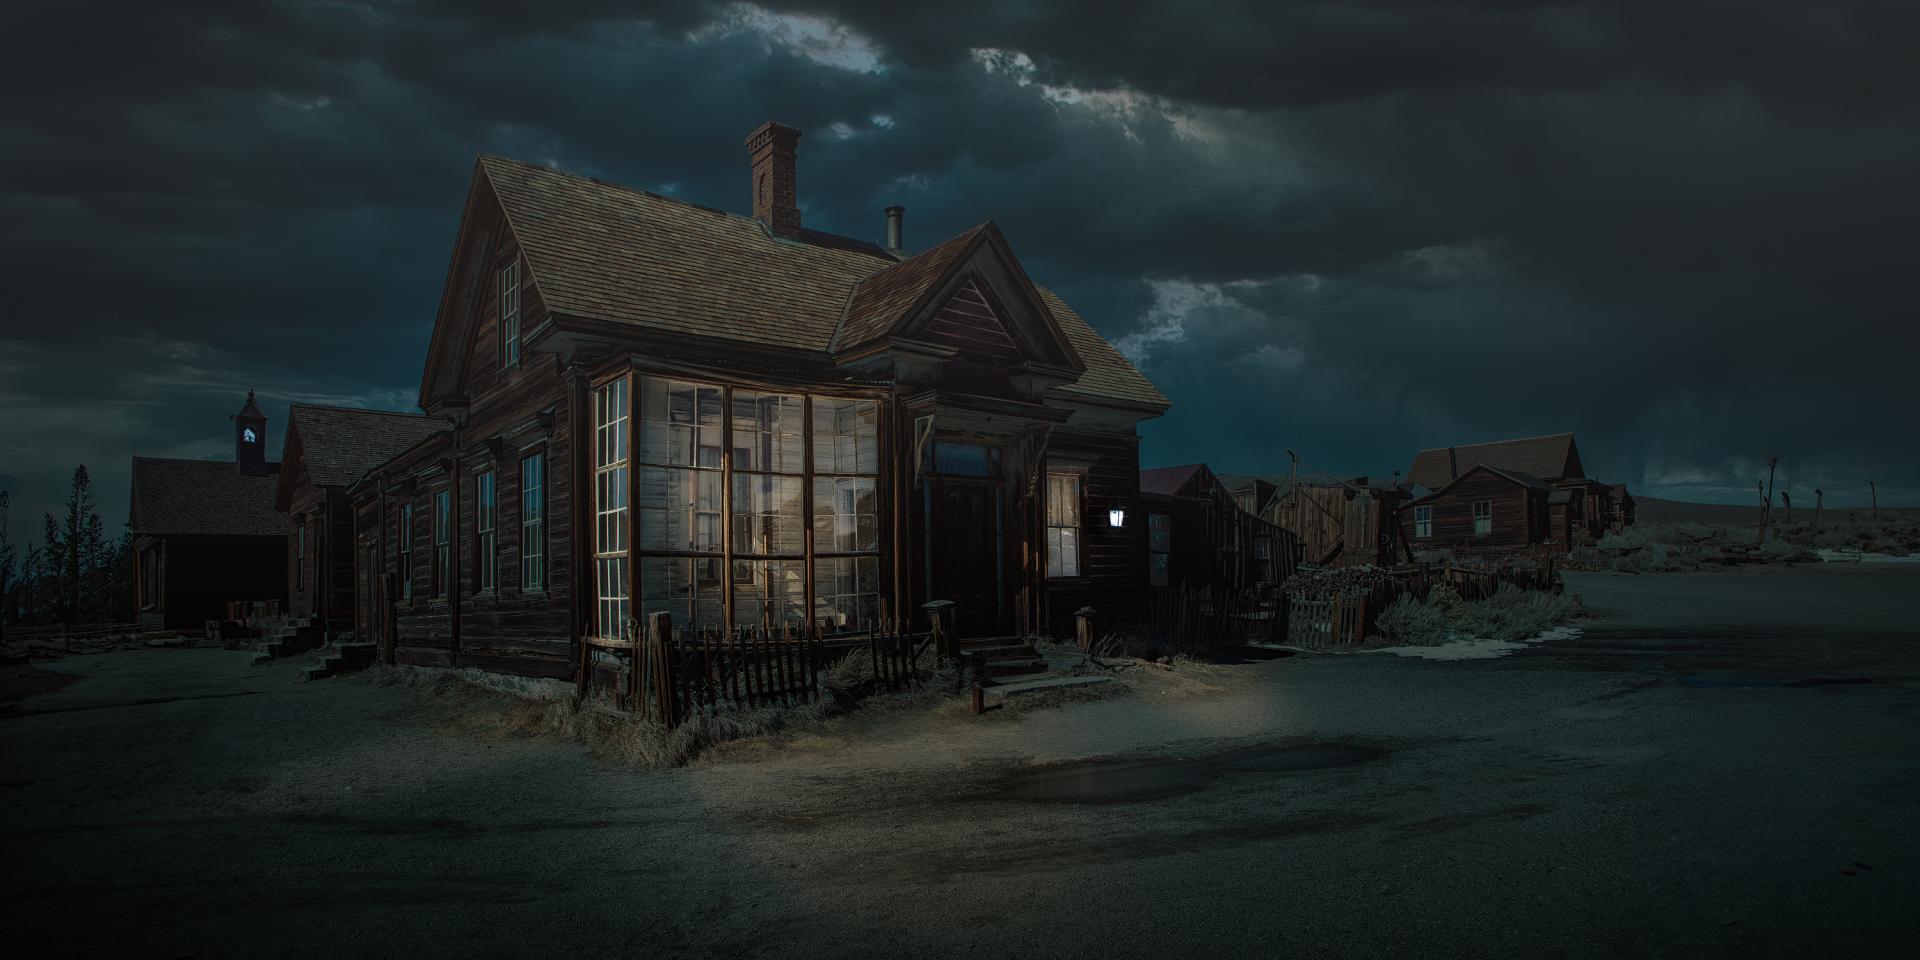 New York Photography Awards Winner - Bodie Ghost Town